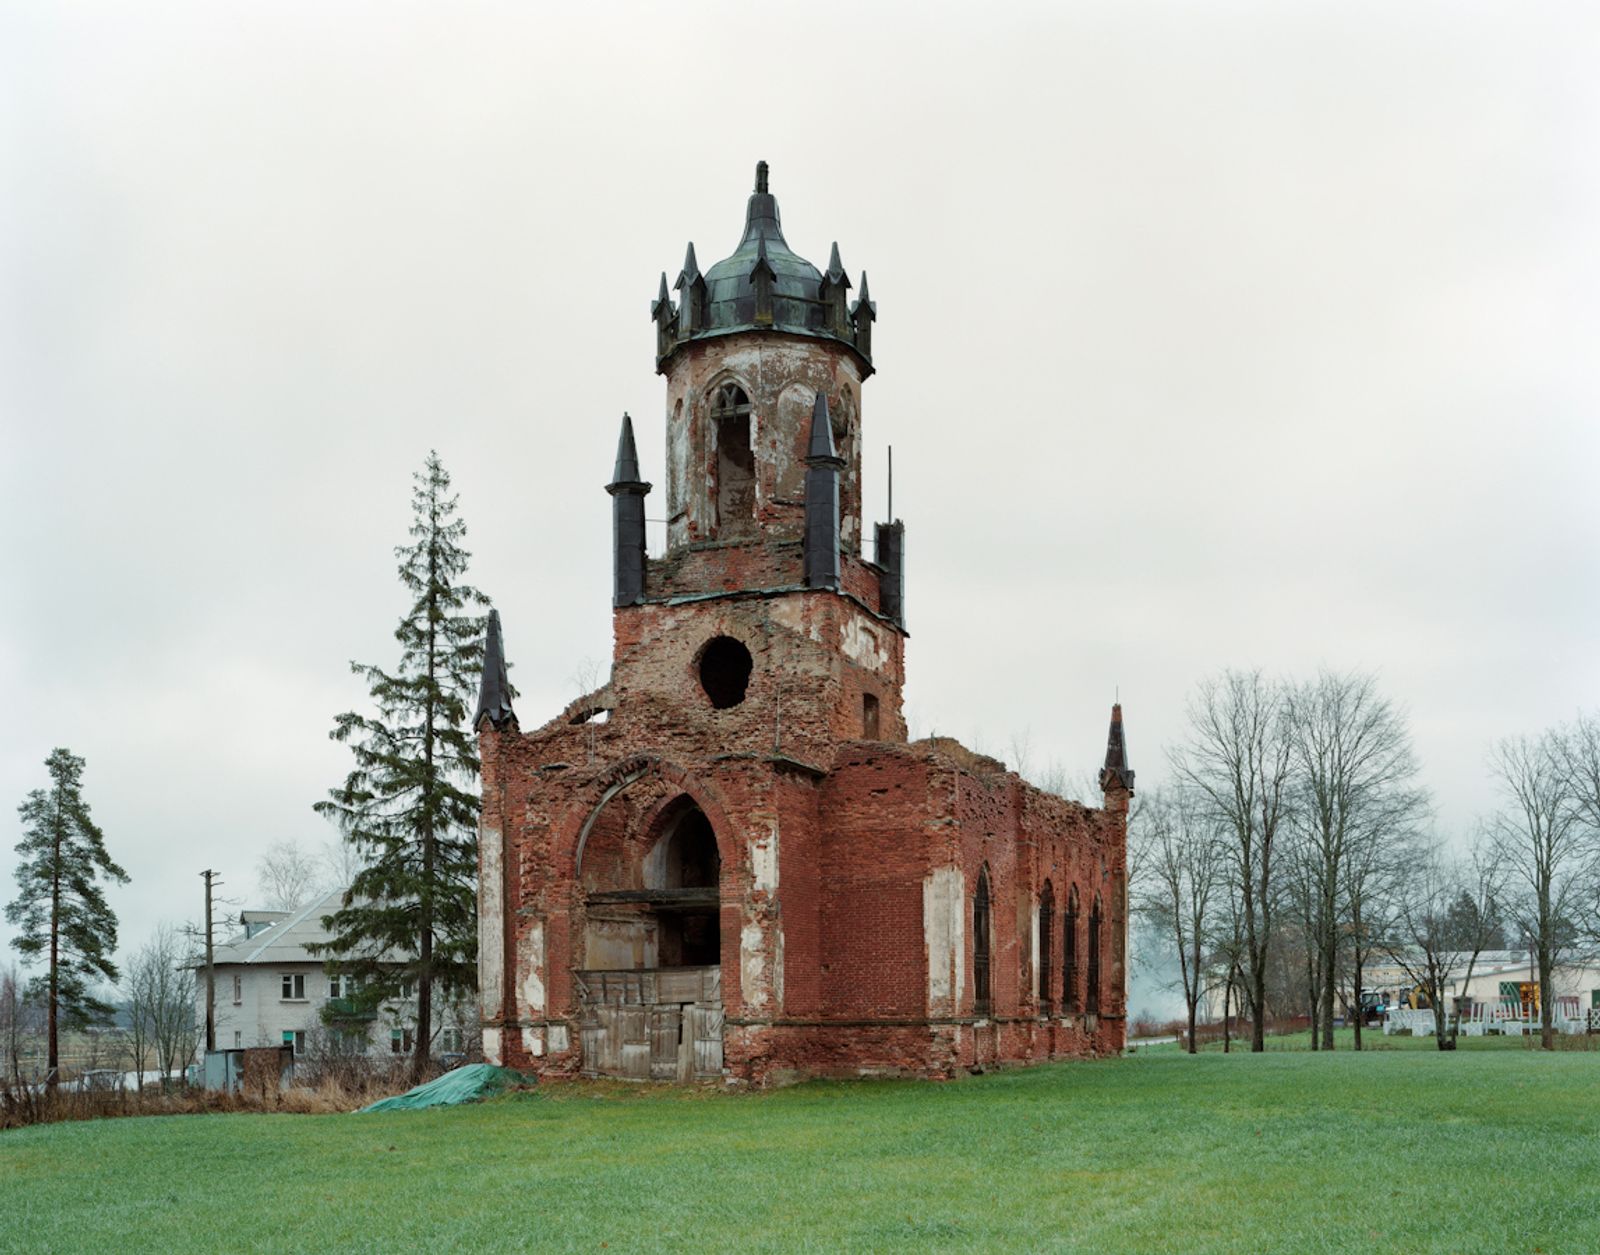 © Petr Antonov - Church of the Holy Trinty in the village of Andrianovo. The church was built in 1831 and closed in 1936.